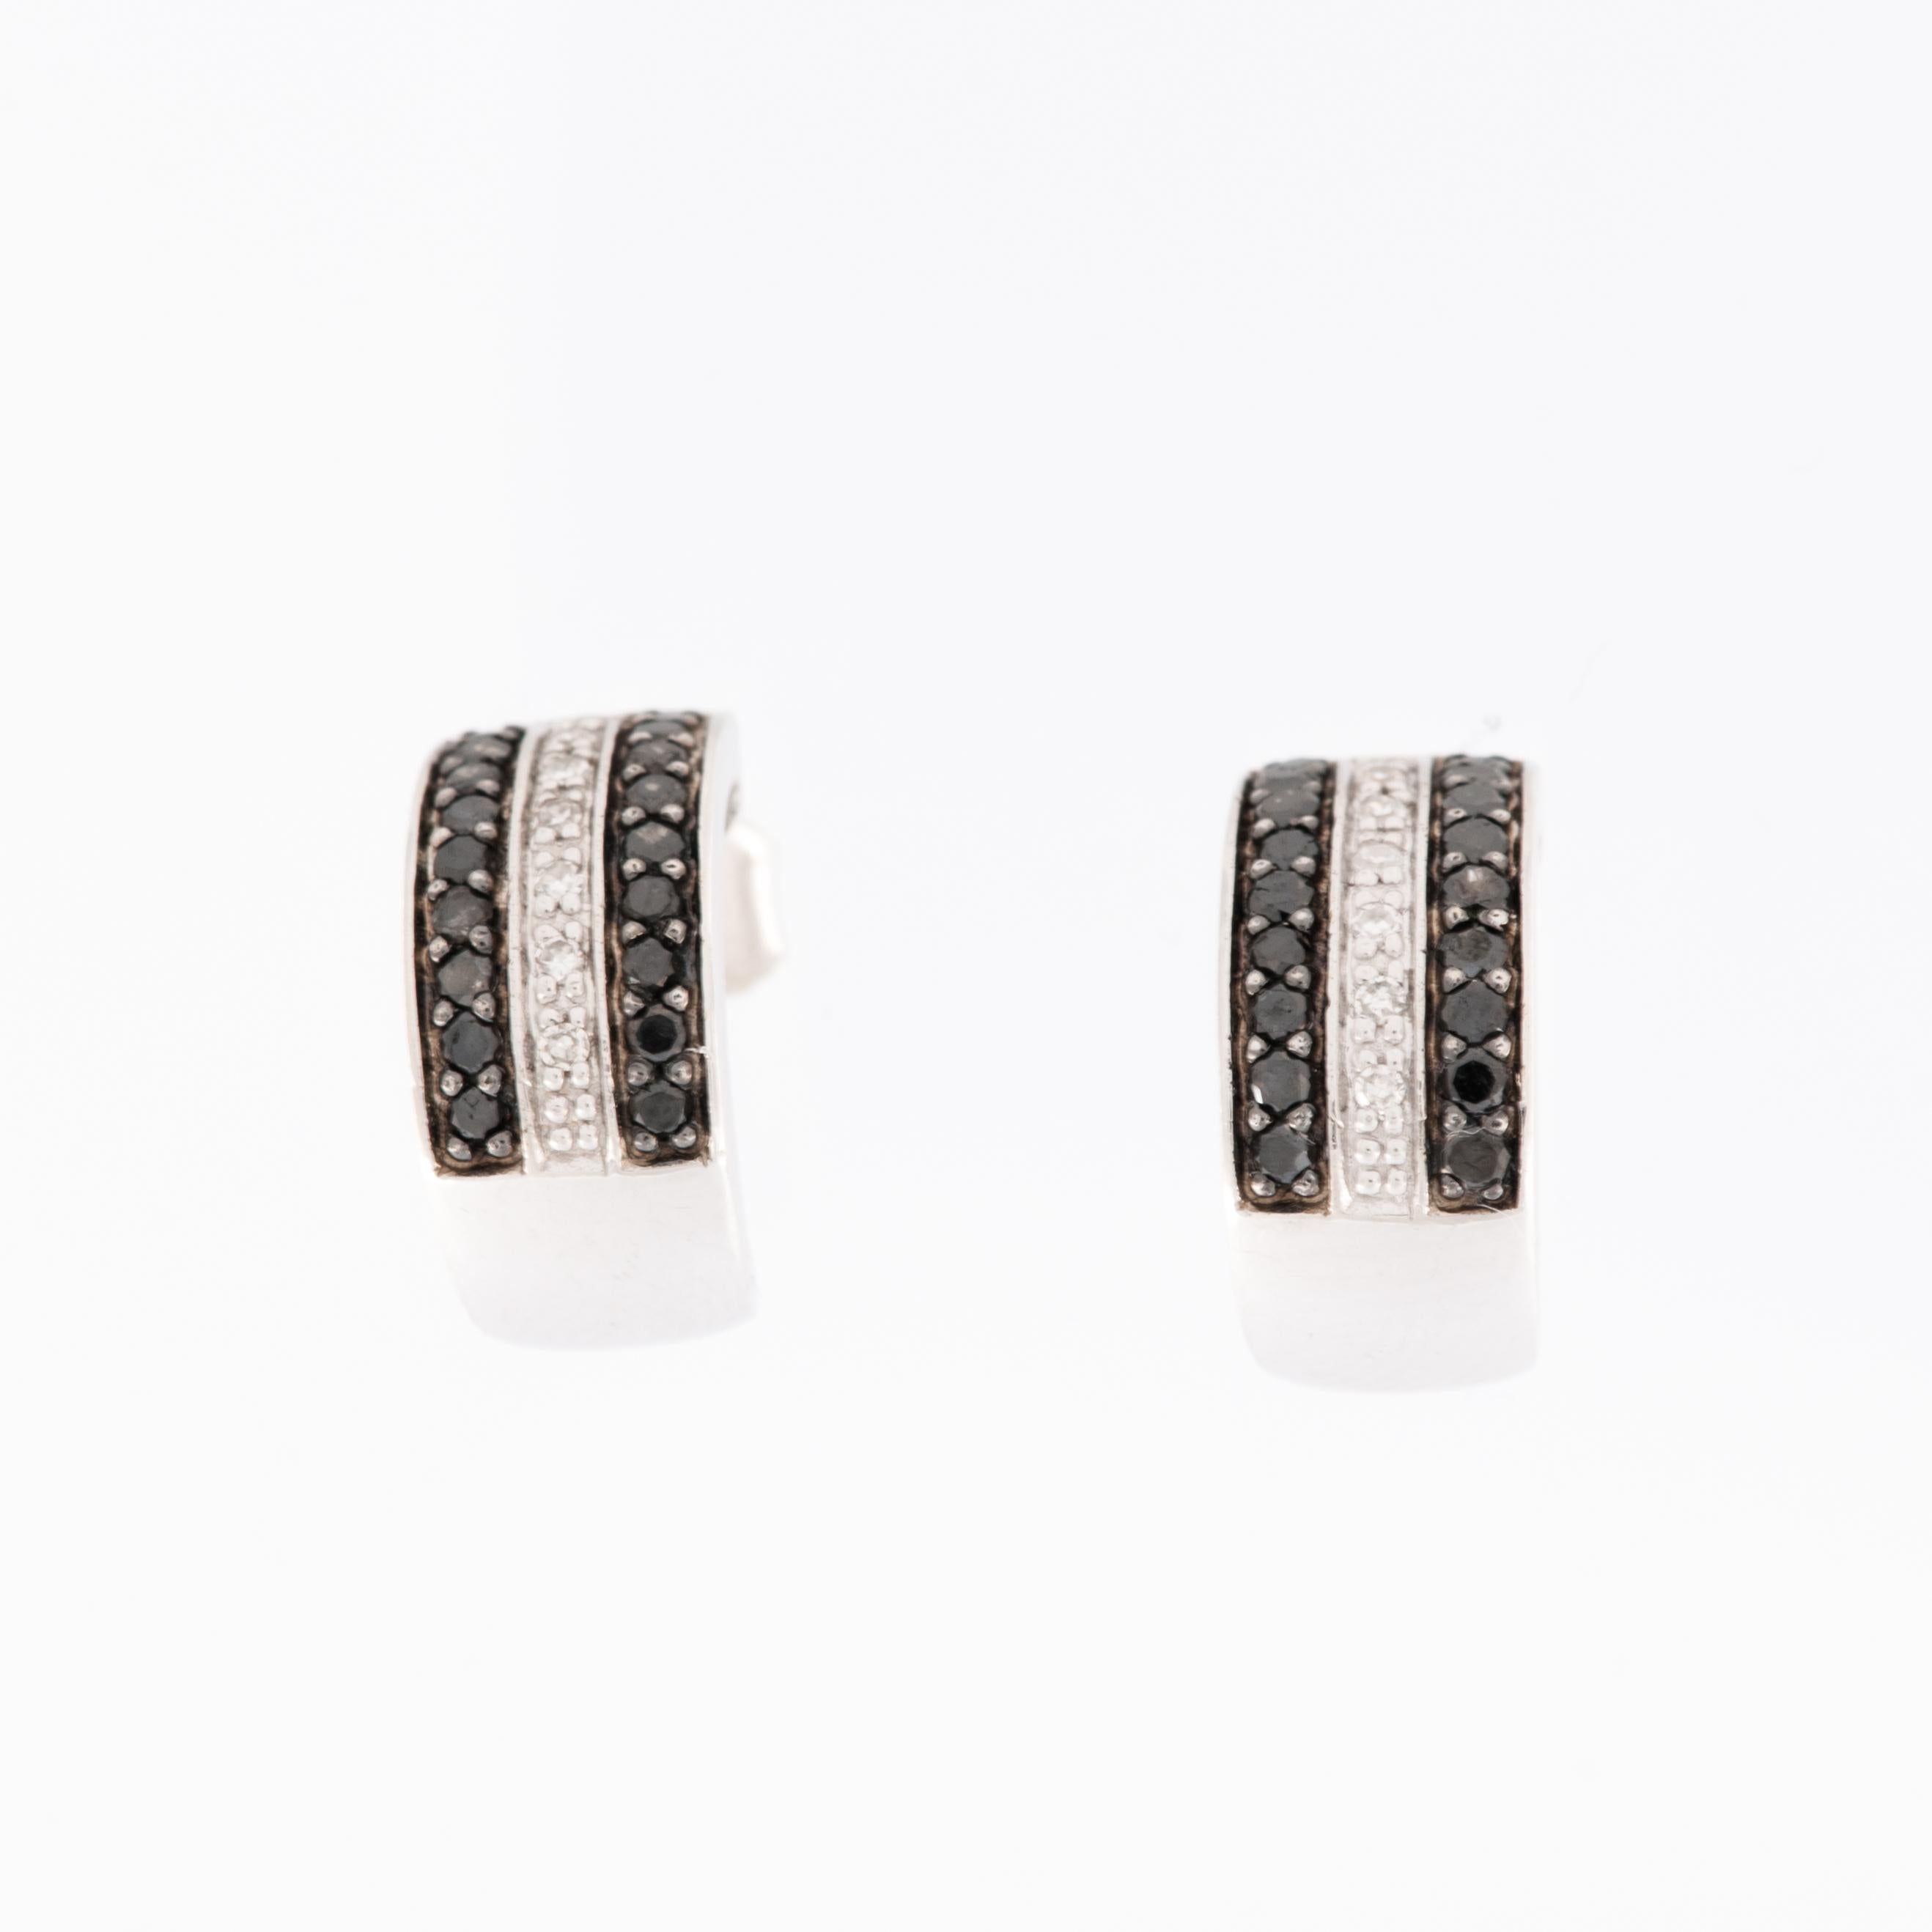 Black and White DIAMONDS, 18KT White Gold Earrings In Good Condition For Sale In Esch-Sur-Alzette, LU